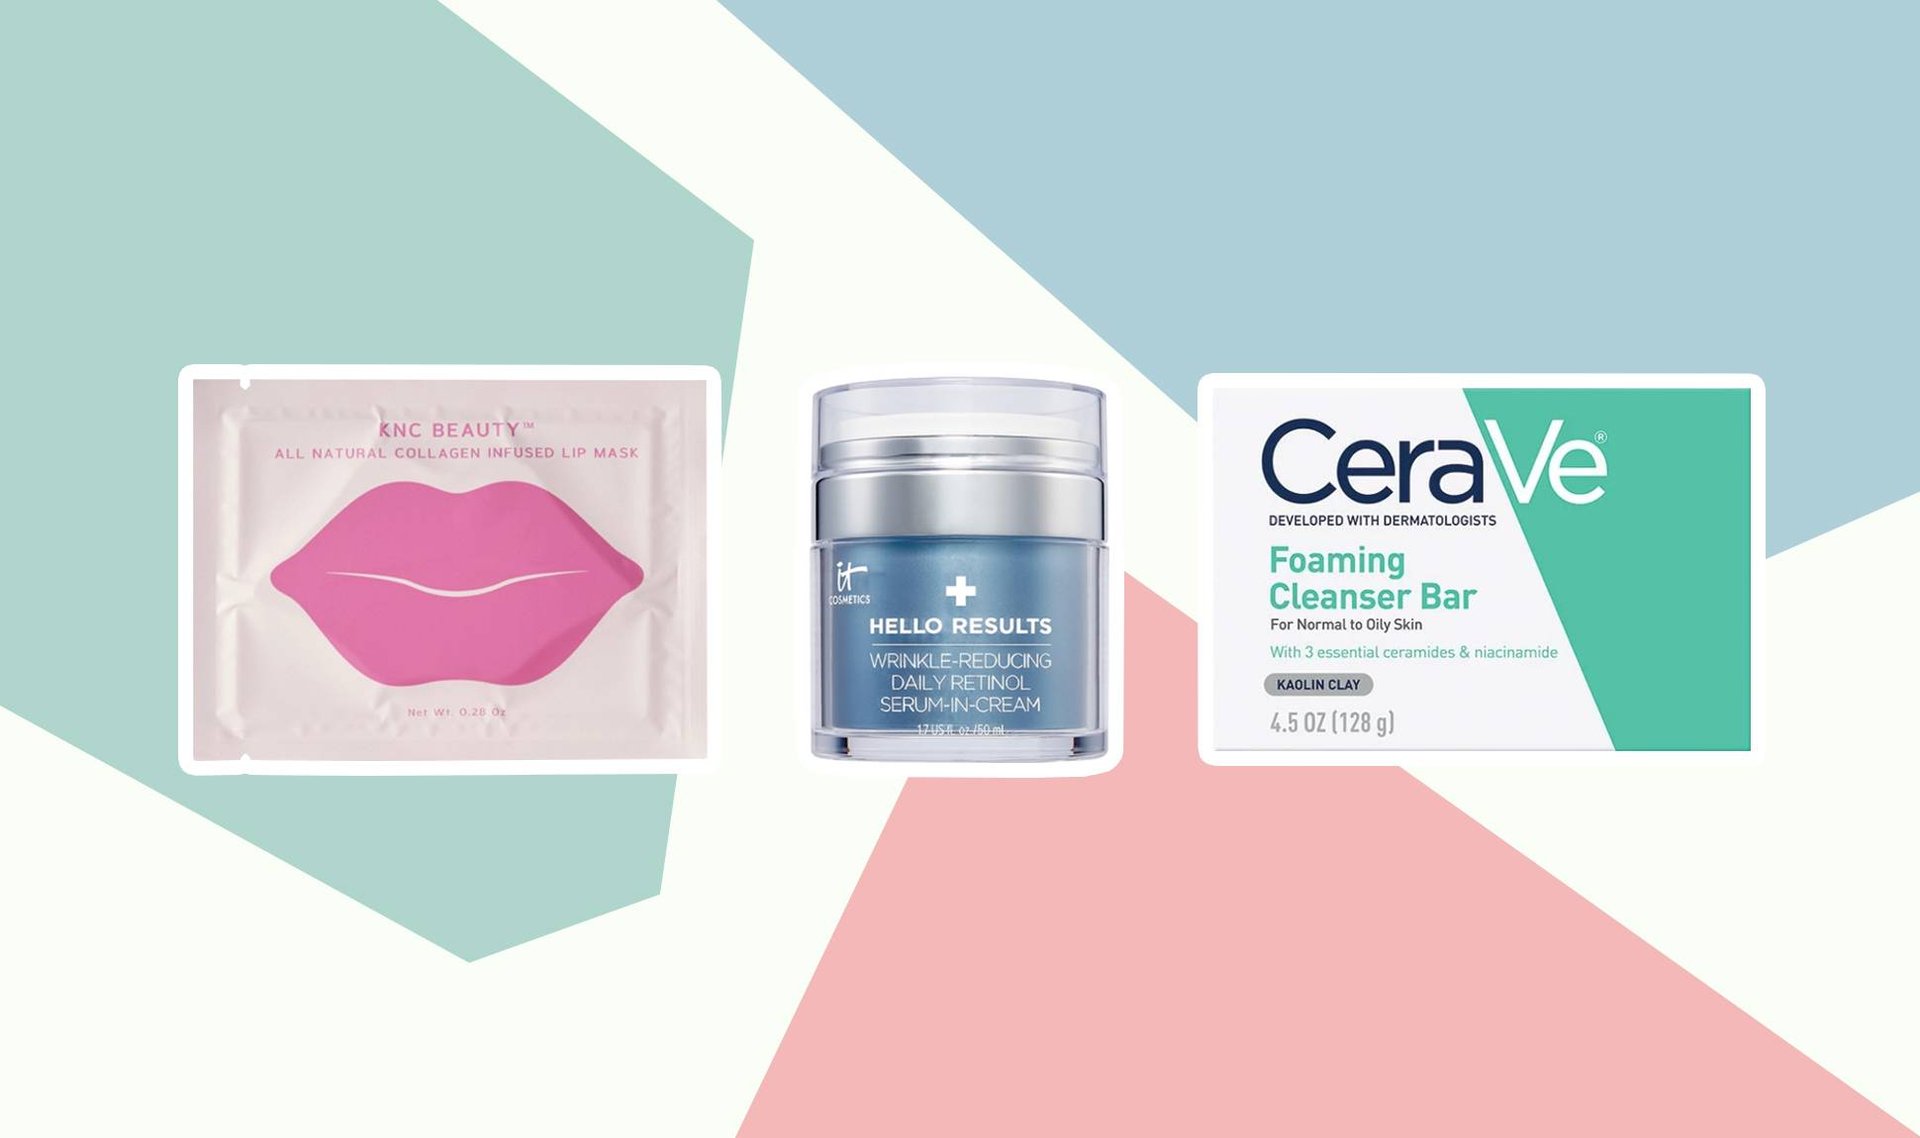 7 Skin-Care Products Our Editors Are Kicking off 2021 With